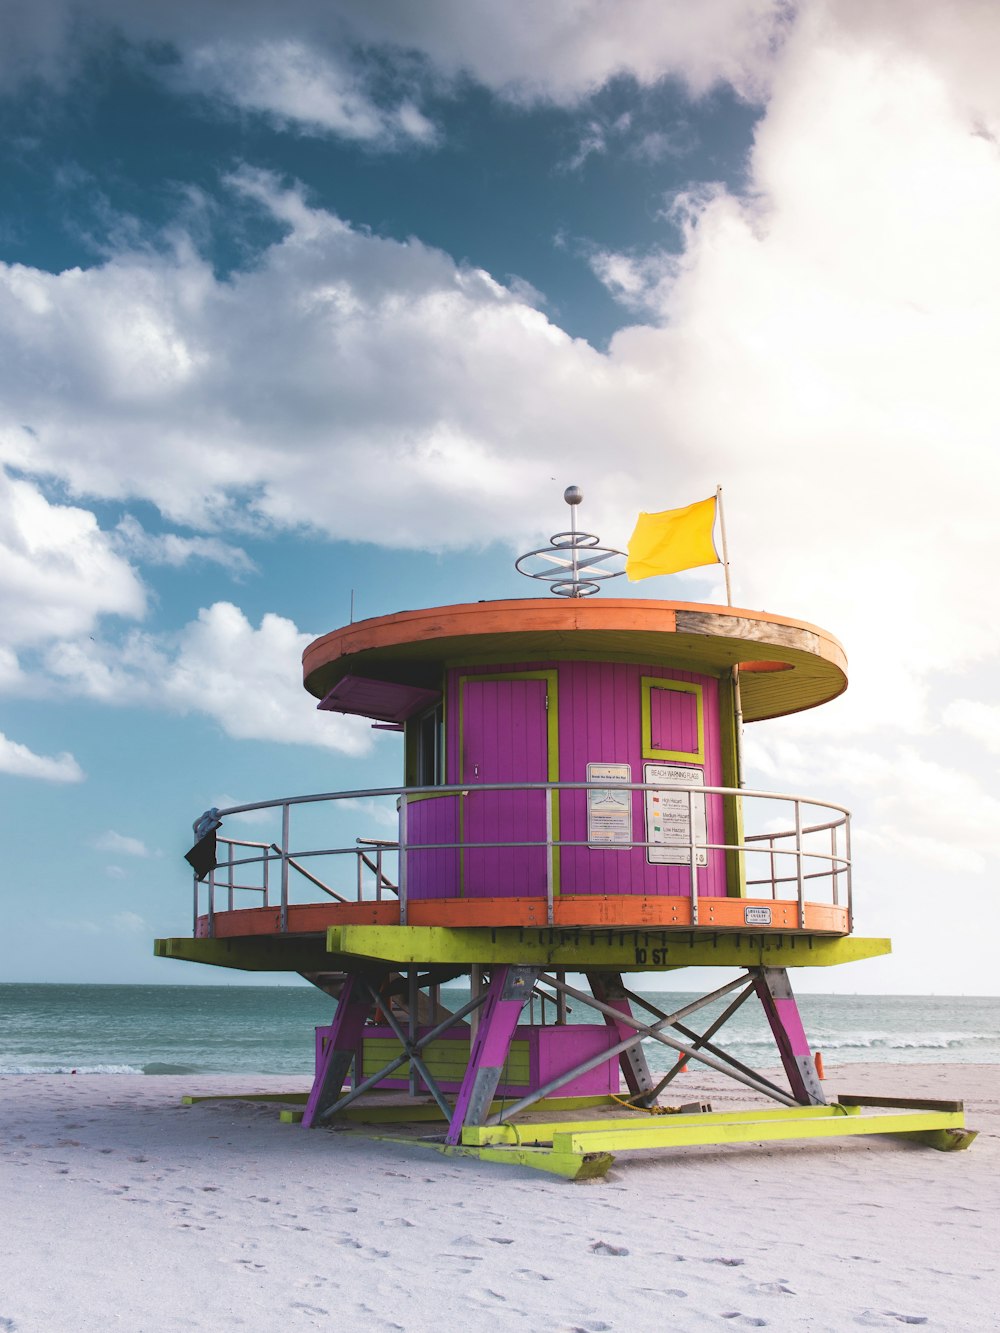 pink and yellow lifeguard tower near body of water